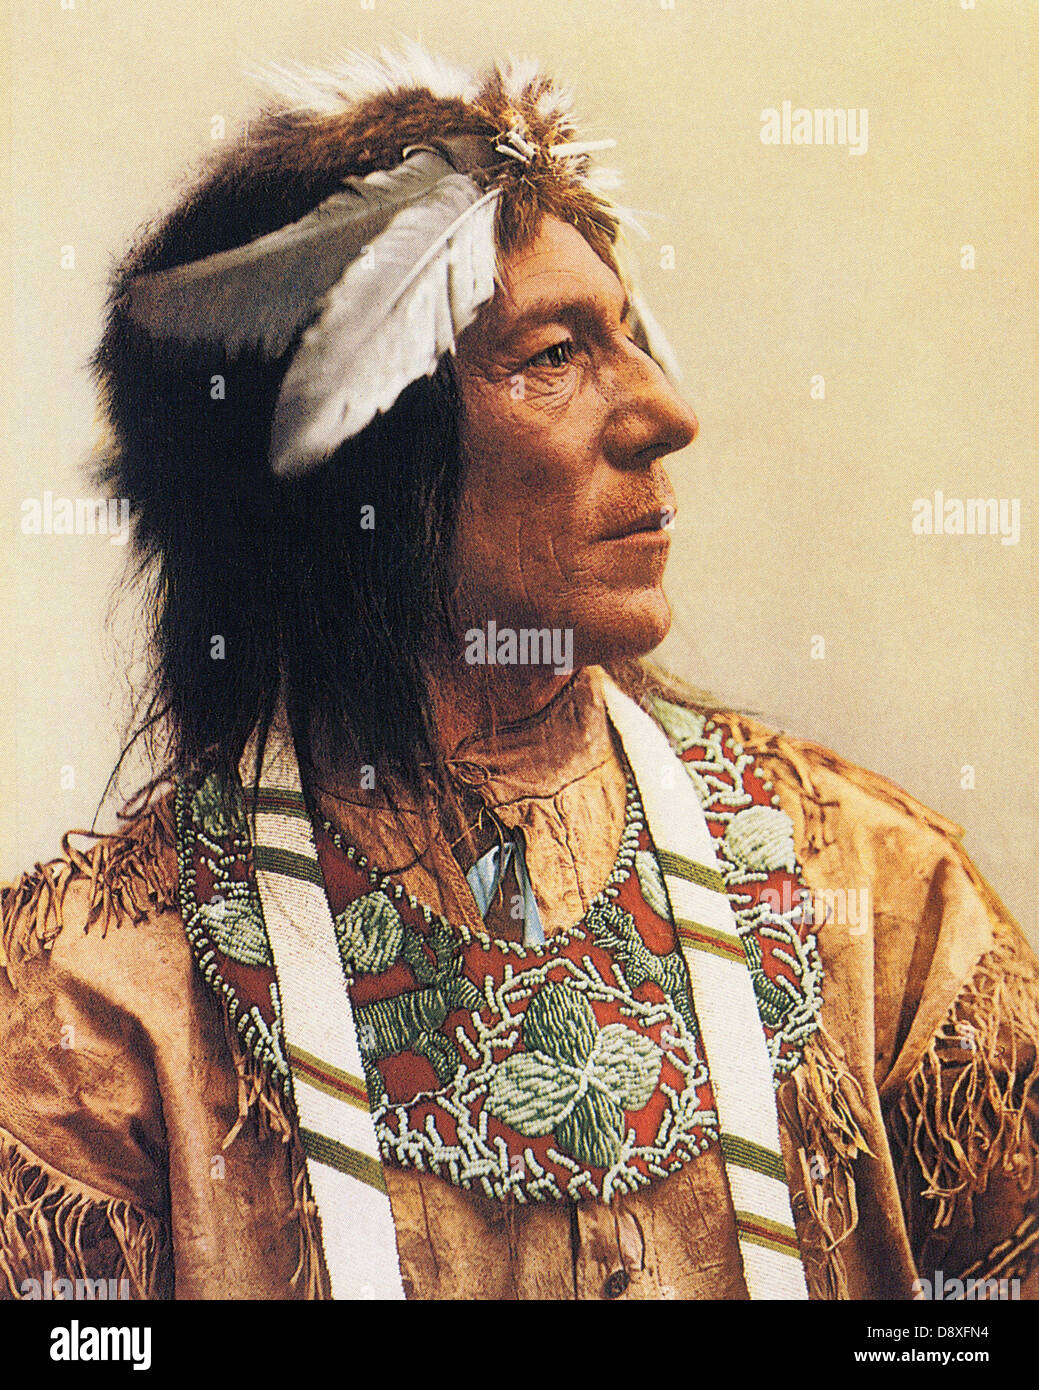 Obtossaway chief of the Ojibwas American Indian tribe, 1903 Stock Photo